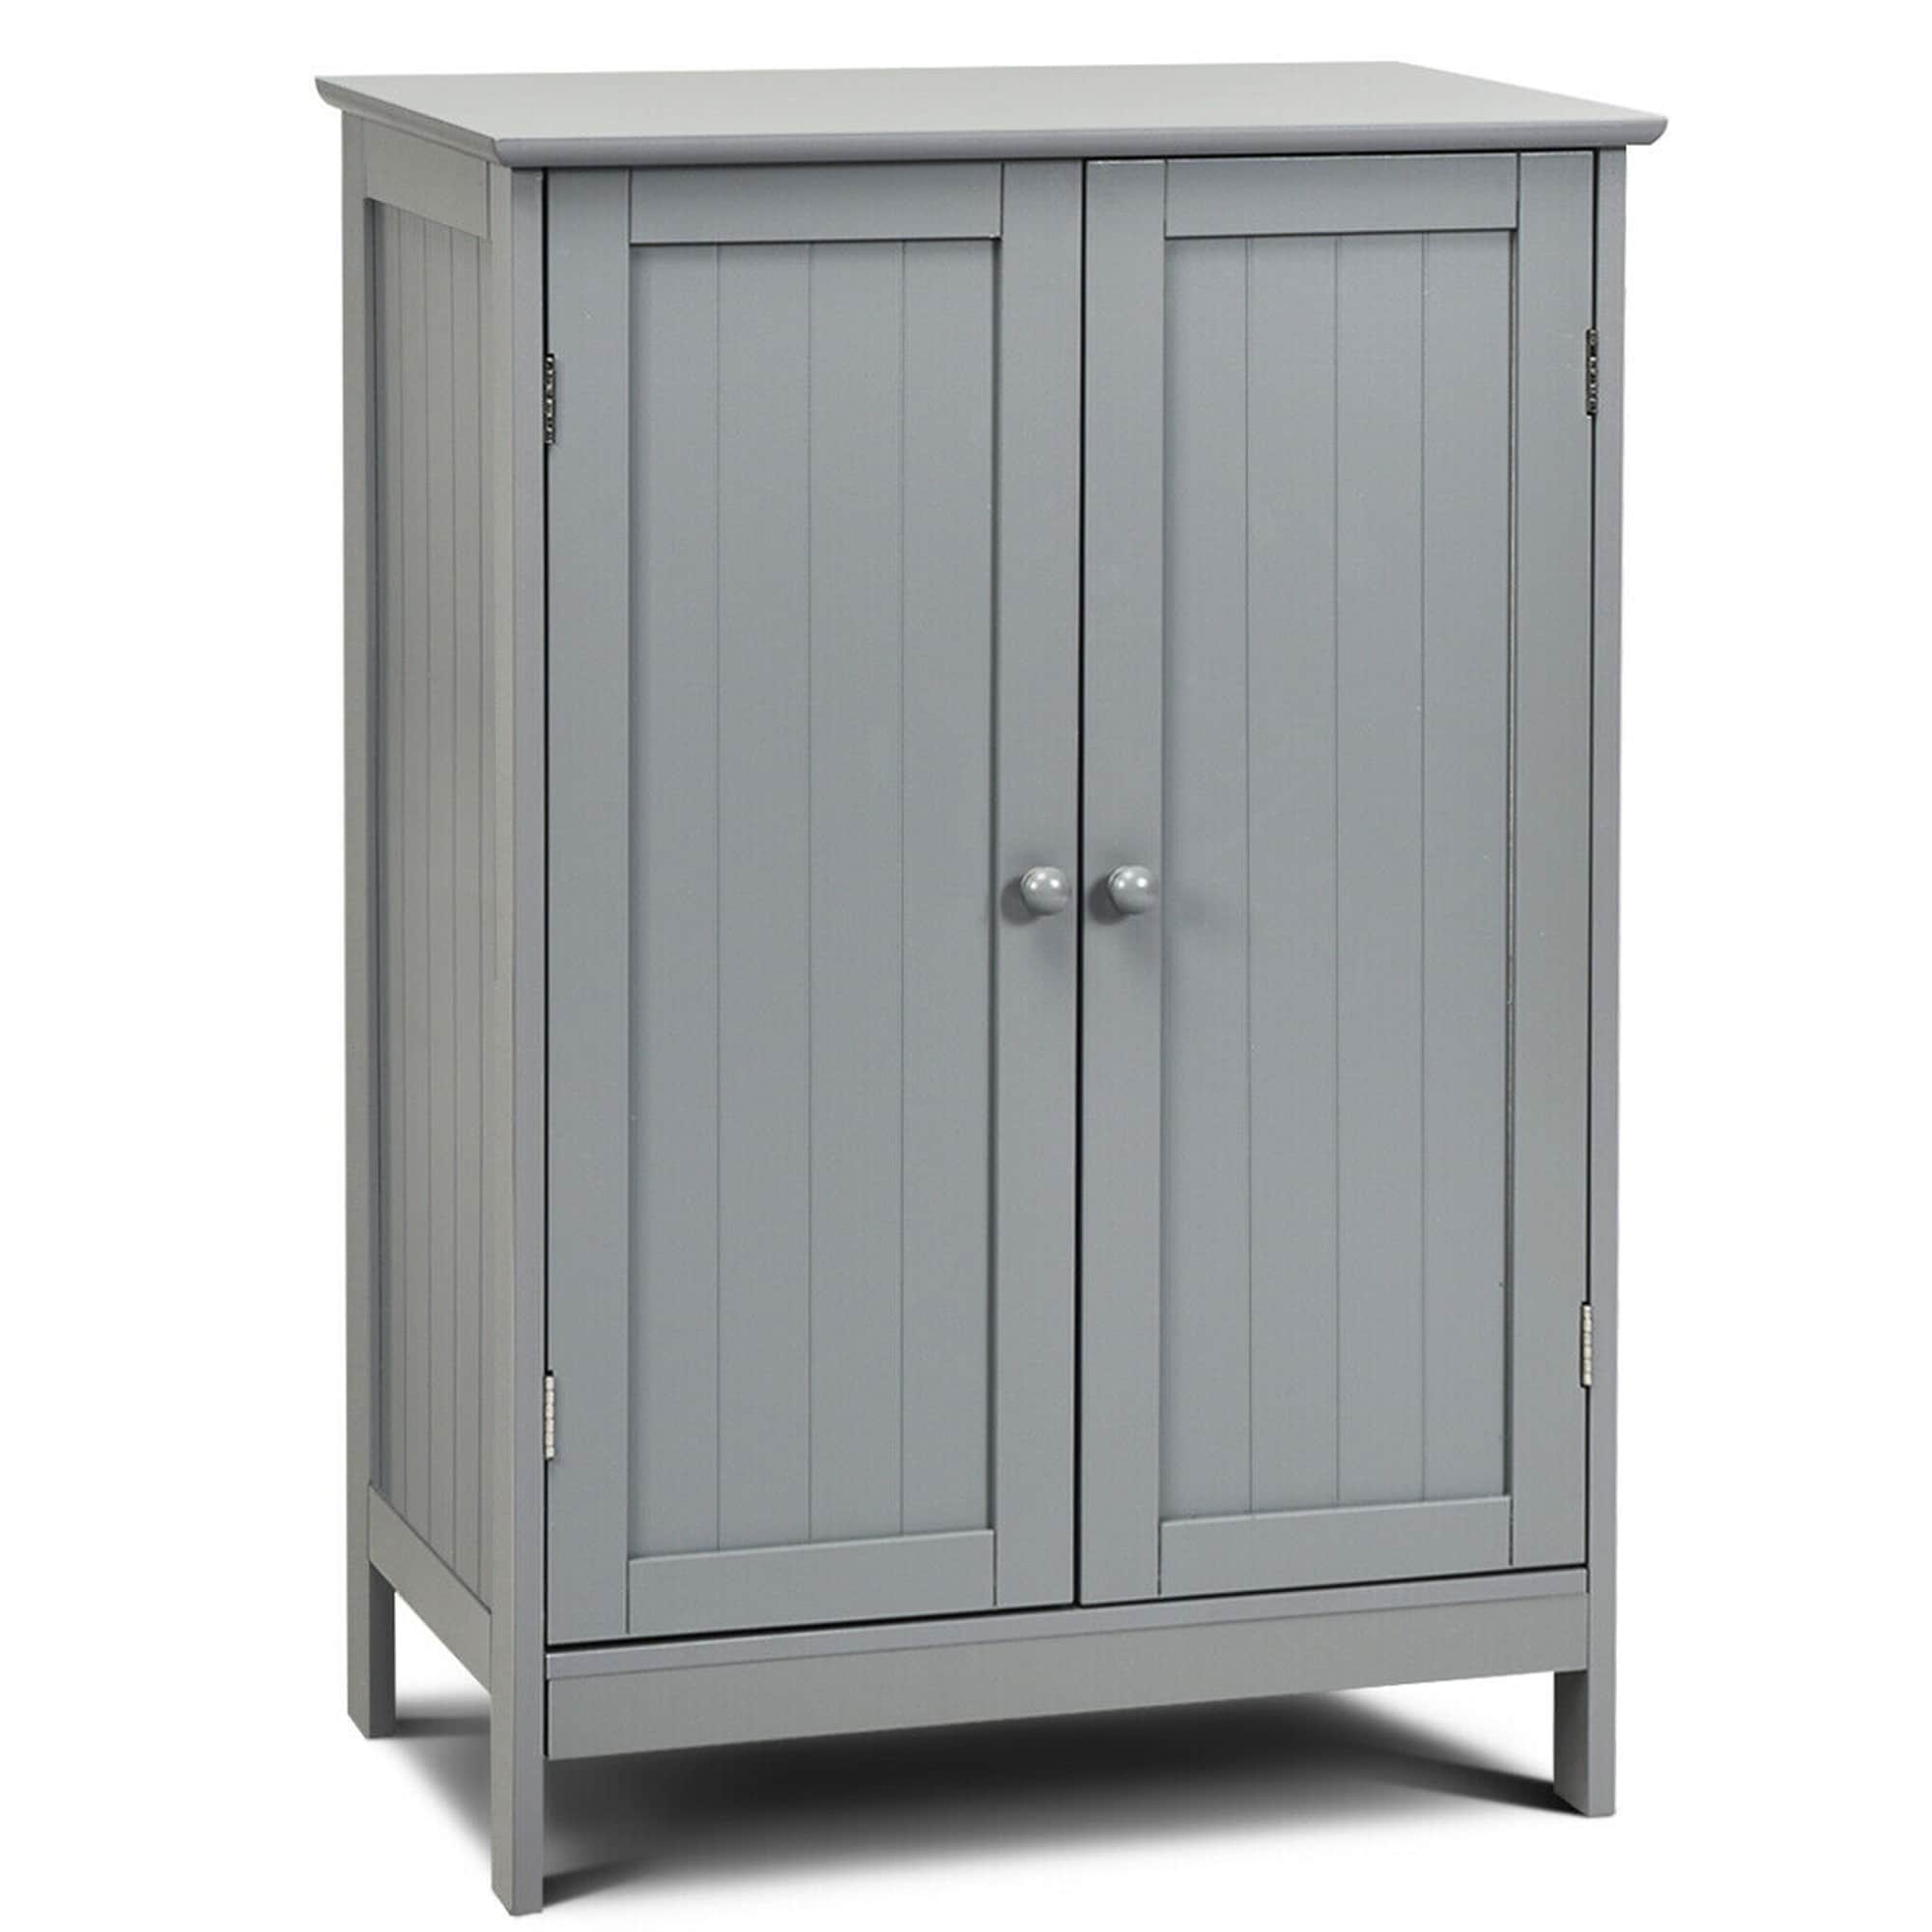 https://ak1.ostkcdn.com/images/products/is/images/direct/019df31bb5a0378e164dddee14132abfc039746e/Bathroom-Storage-Cabinet-with-Double-Doors-Wooden-Floor-Shoe-Cabinet.jpg